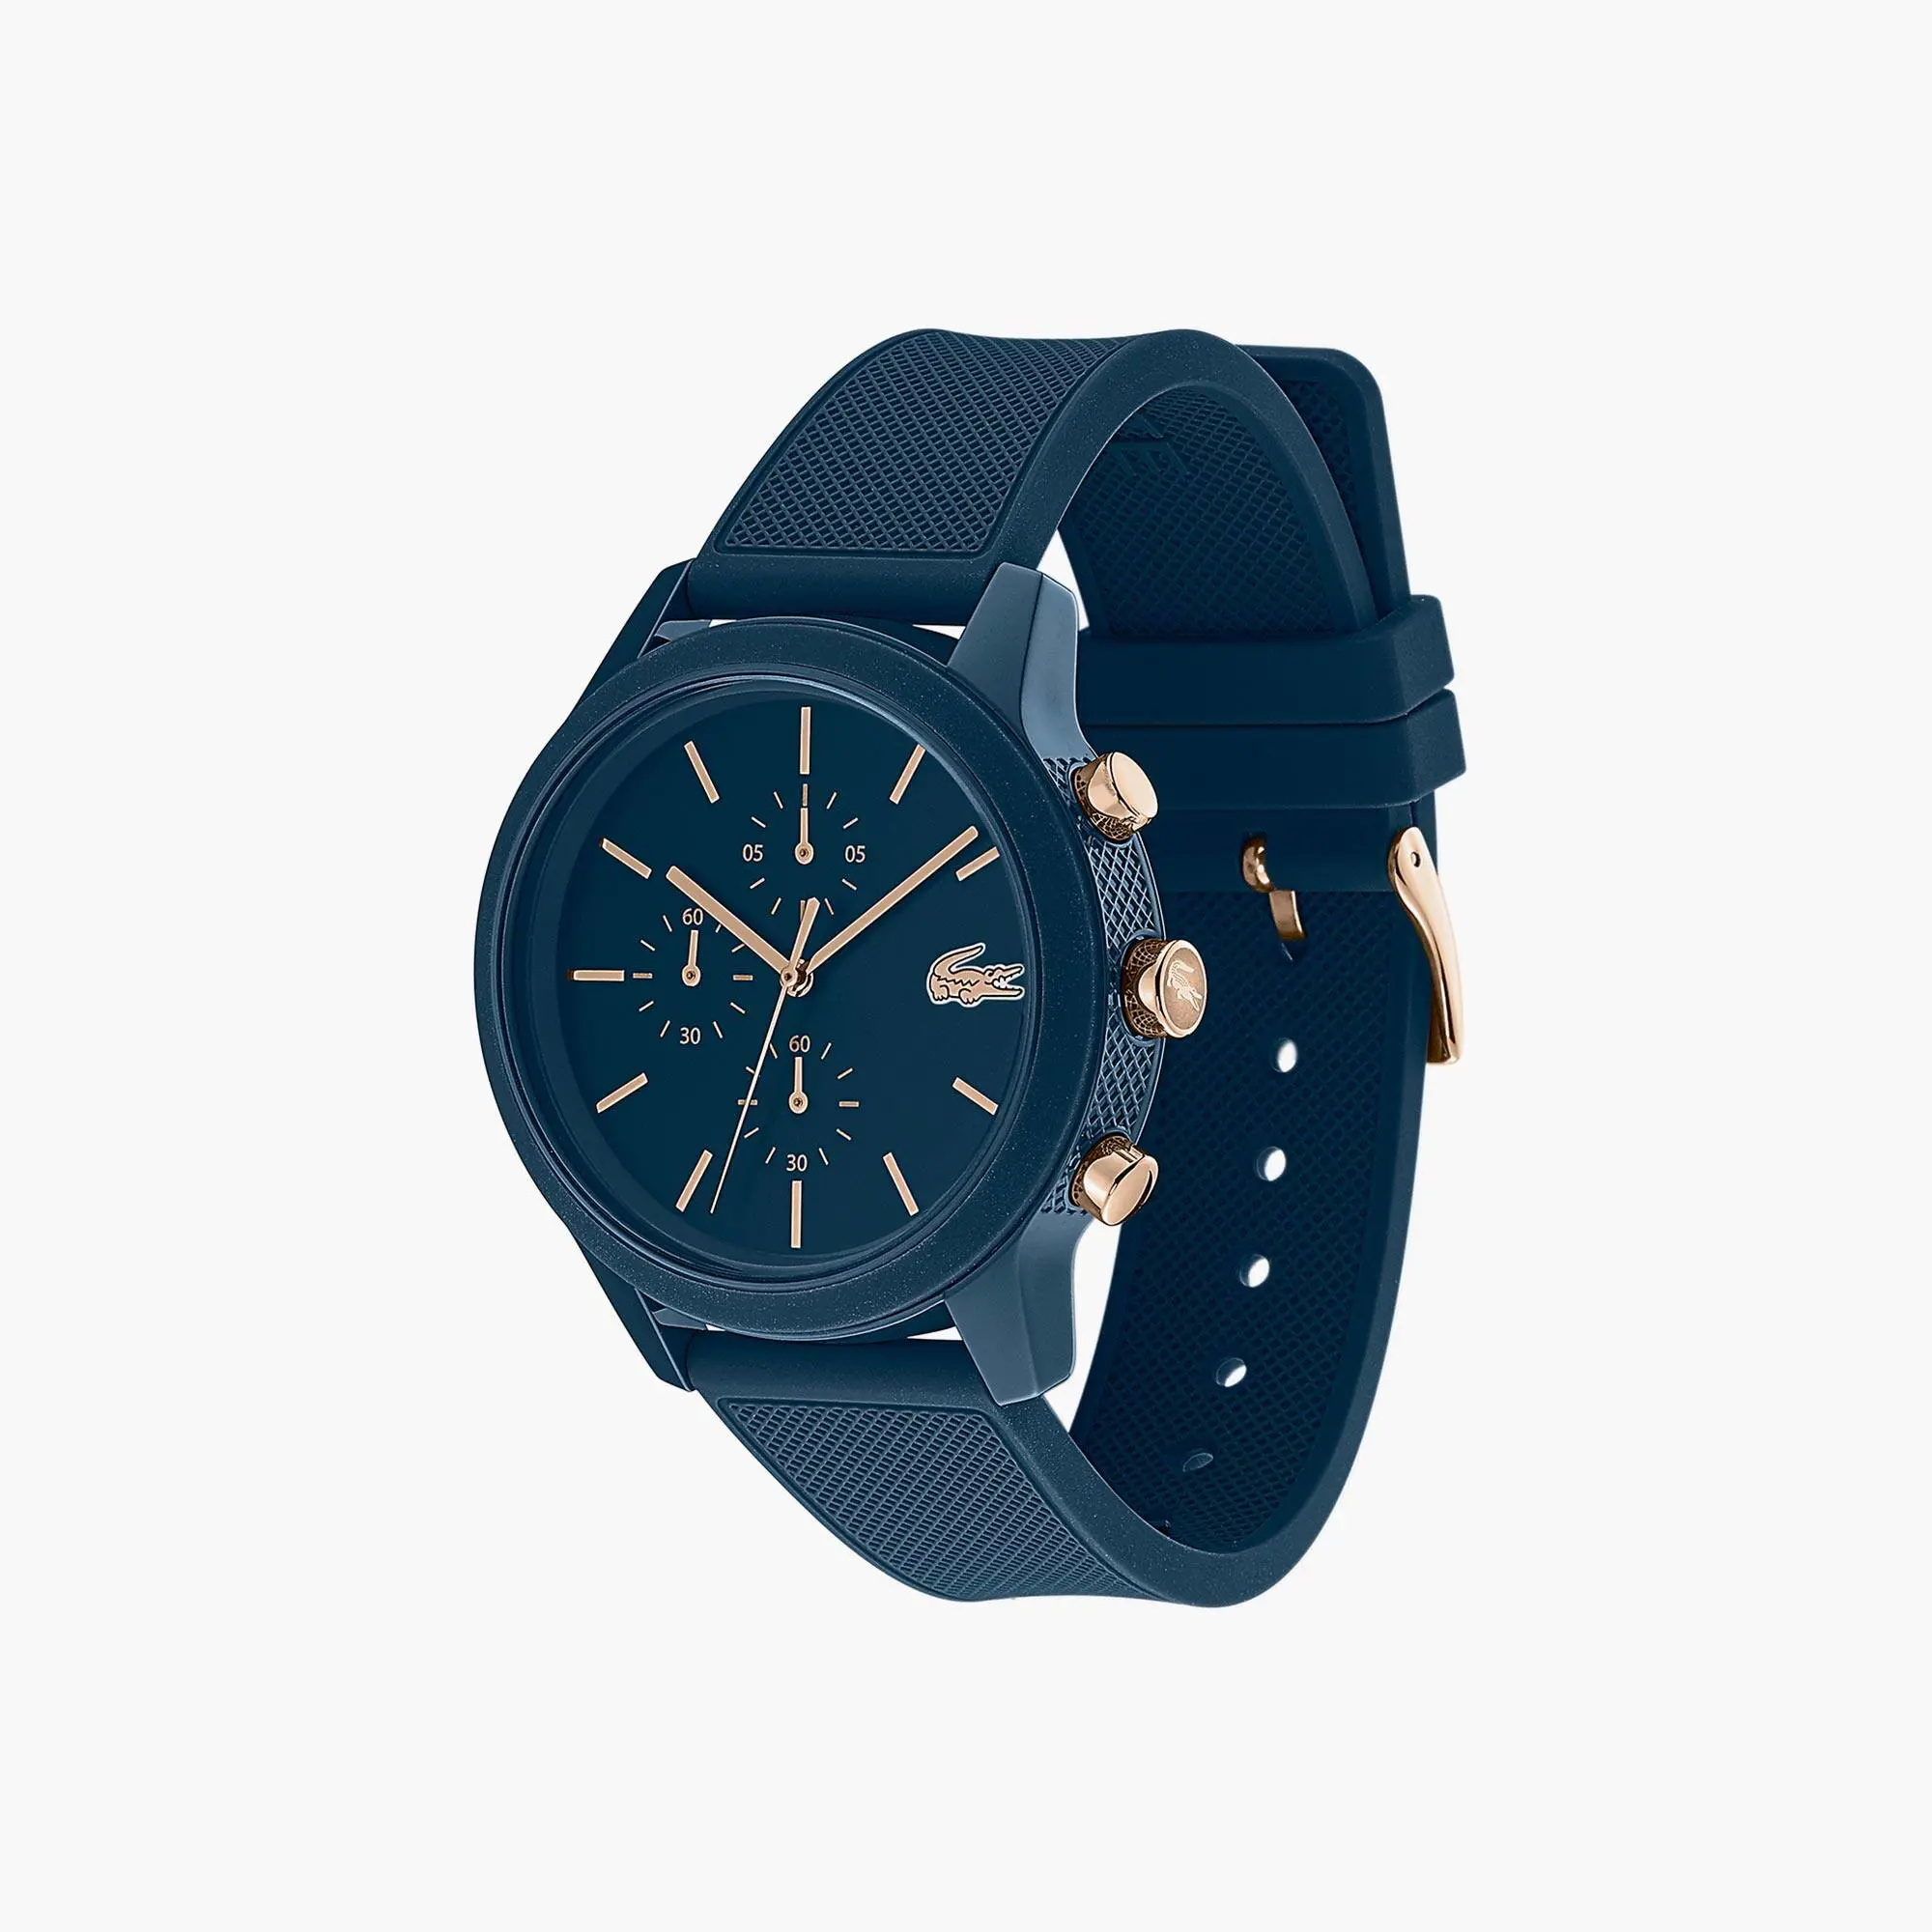 Lacoste Gents Lacoste.12.12 Watch With Navy Silicone Petit Piqué Strap. 2